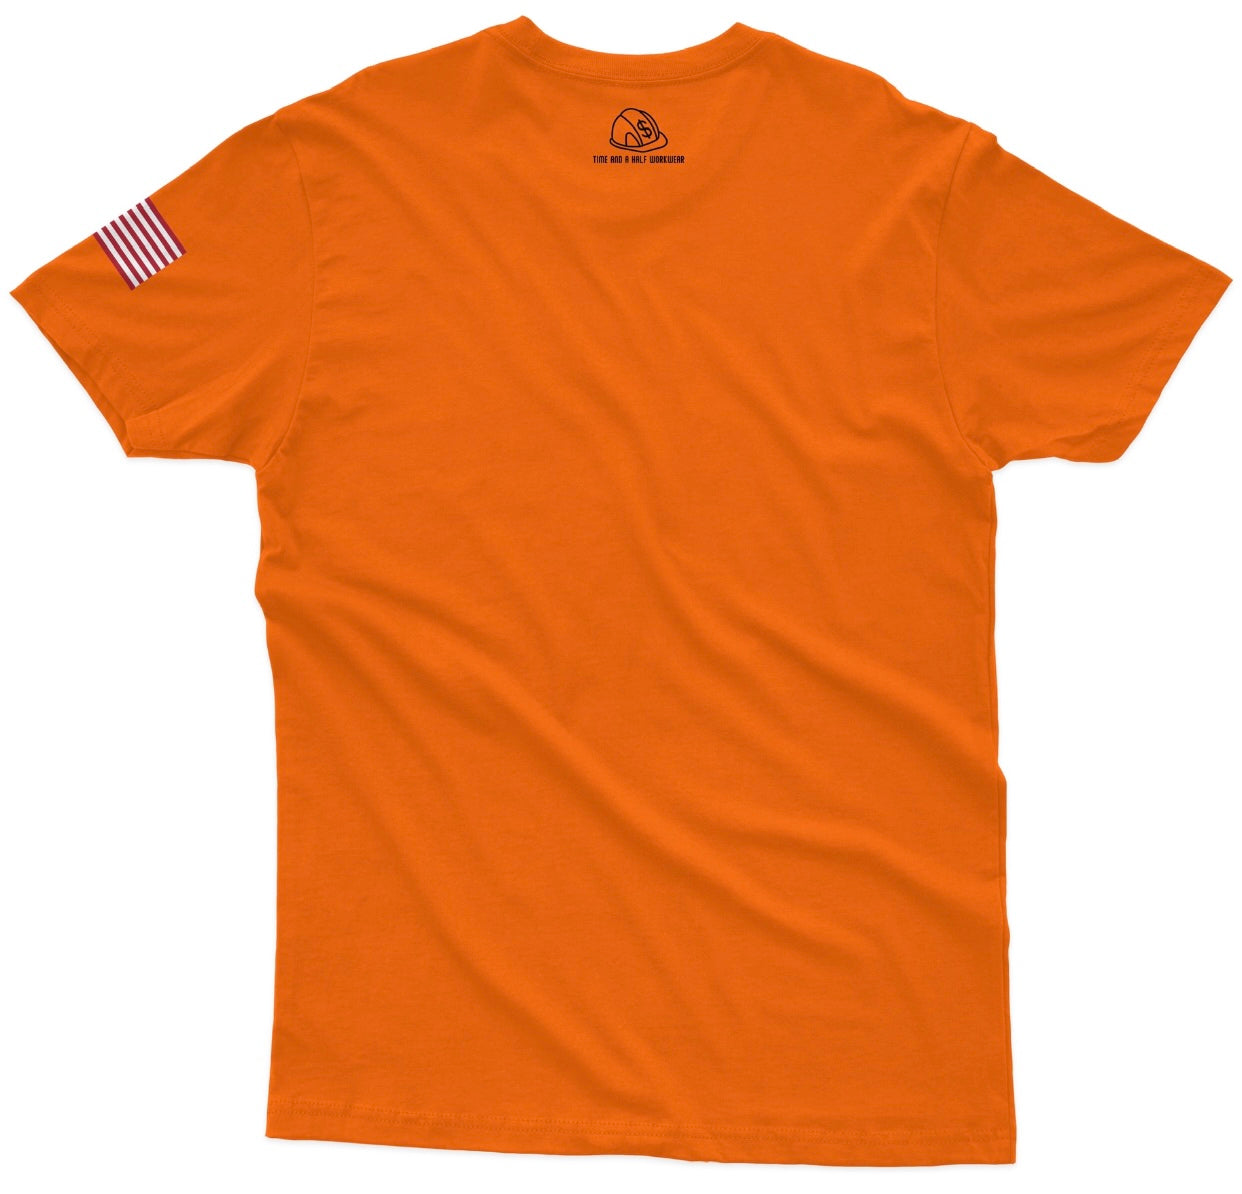 Cunty T-Shirt in Safety and – Workwear Orange Half a Time